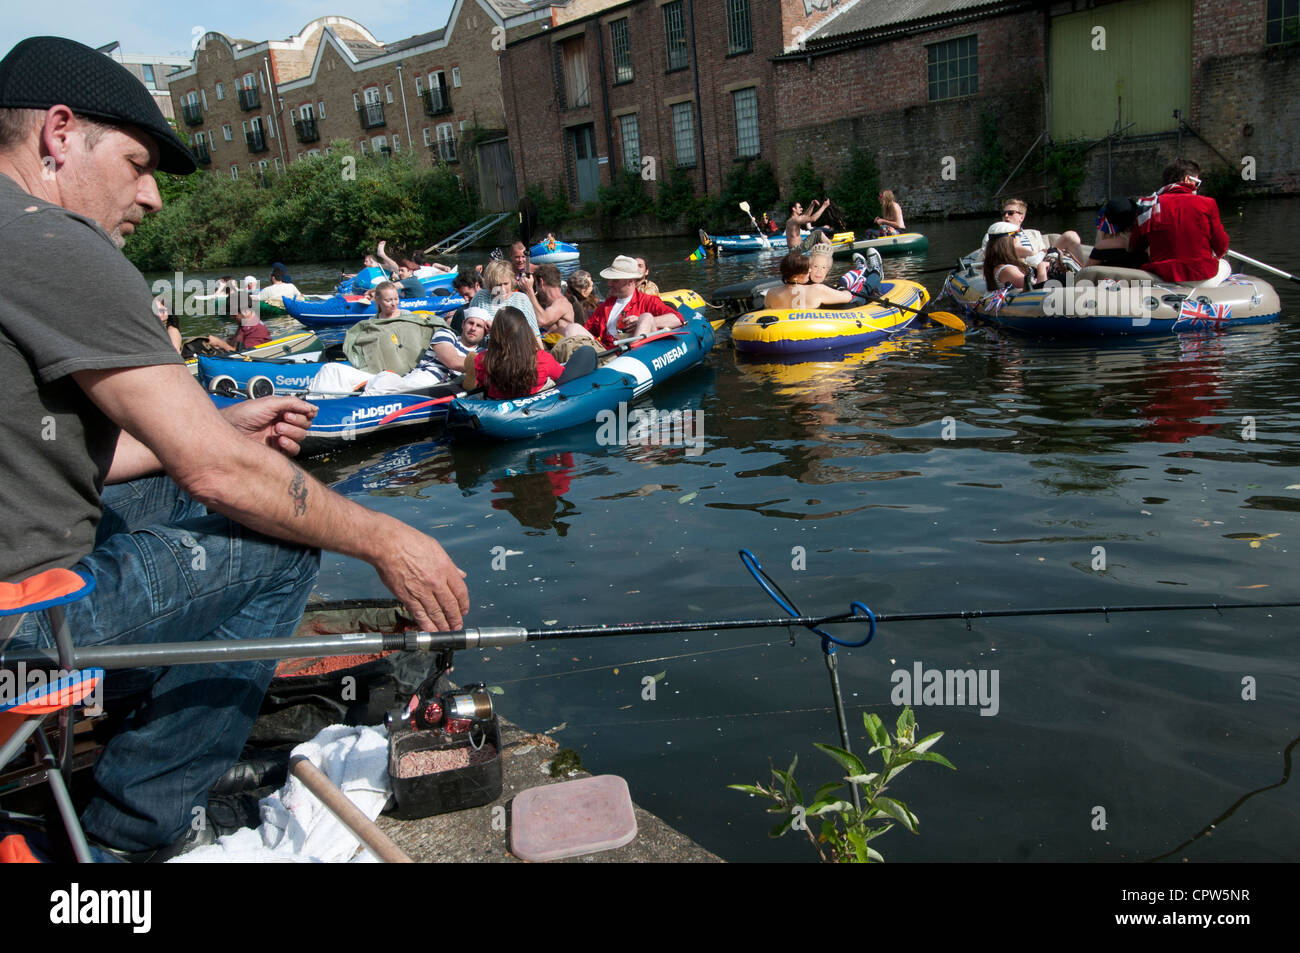 Queen's Jubillegal flotilla floating party, passes a man fishing on Regent's Canal, East London Stock Photo